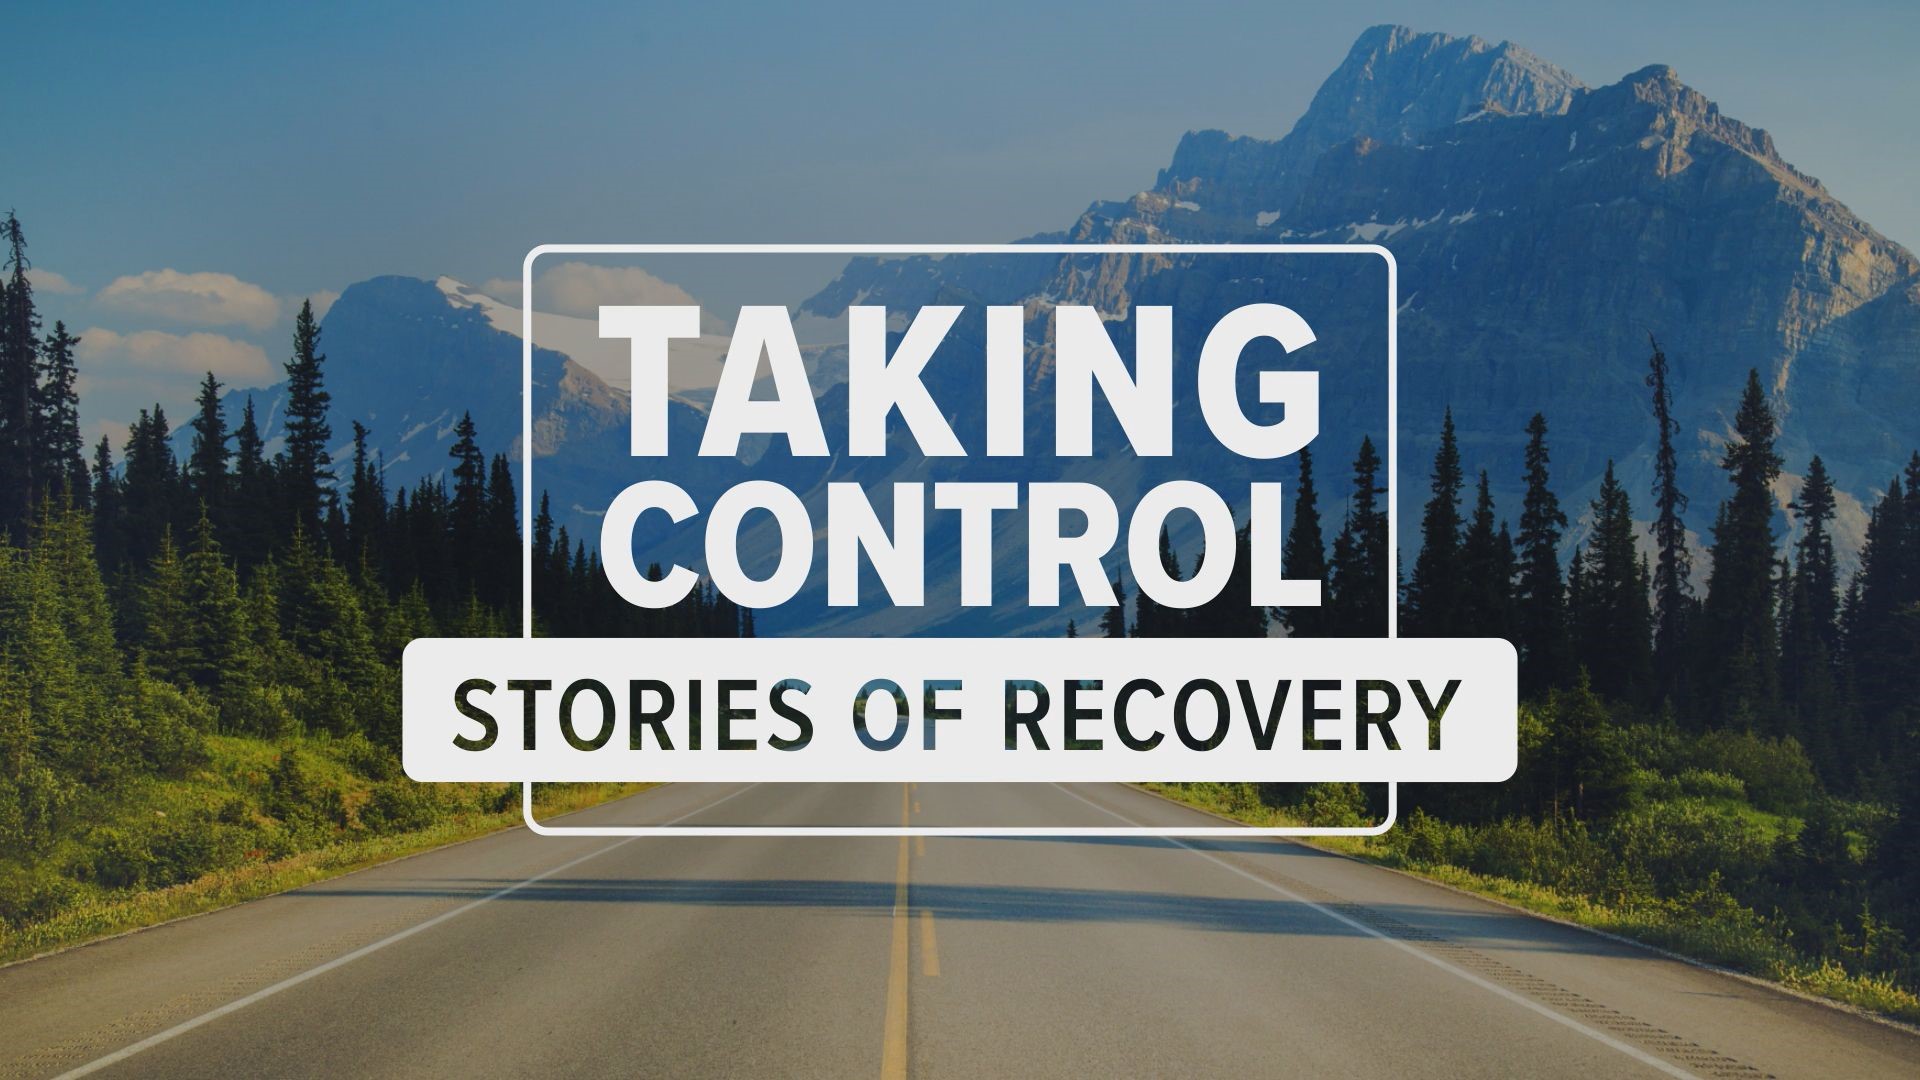 Each recovery story is different but has the same goal – to take control.